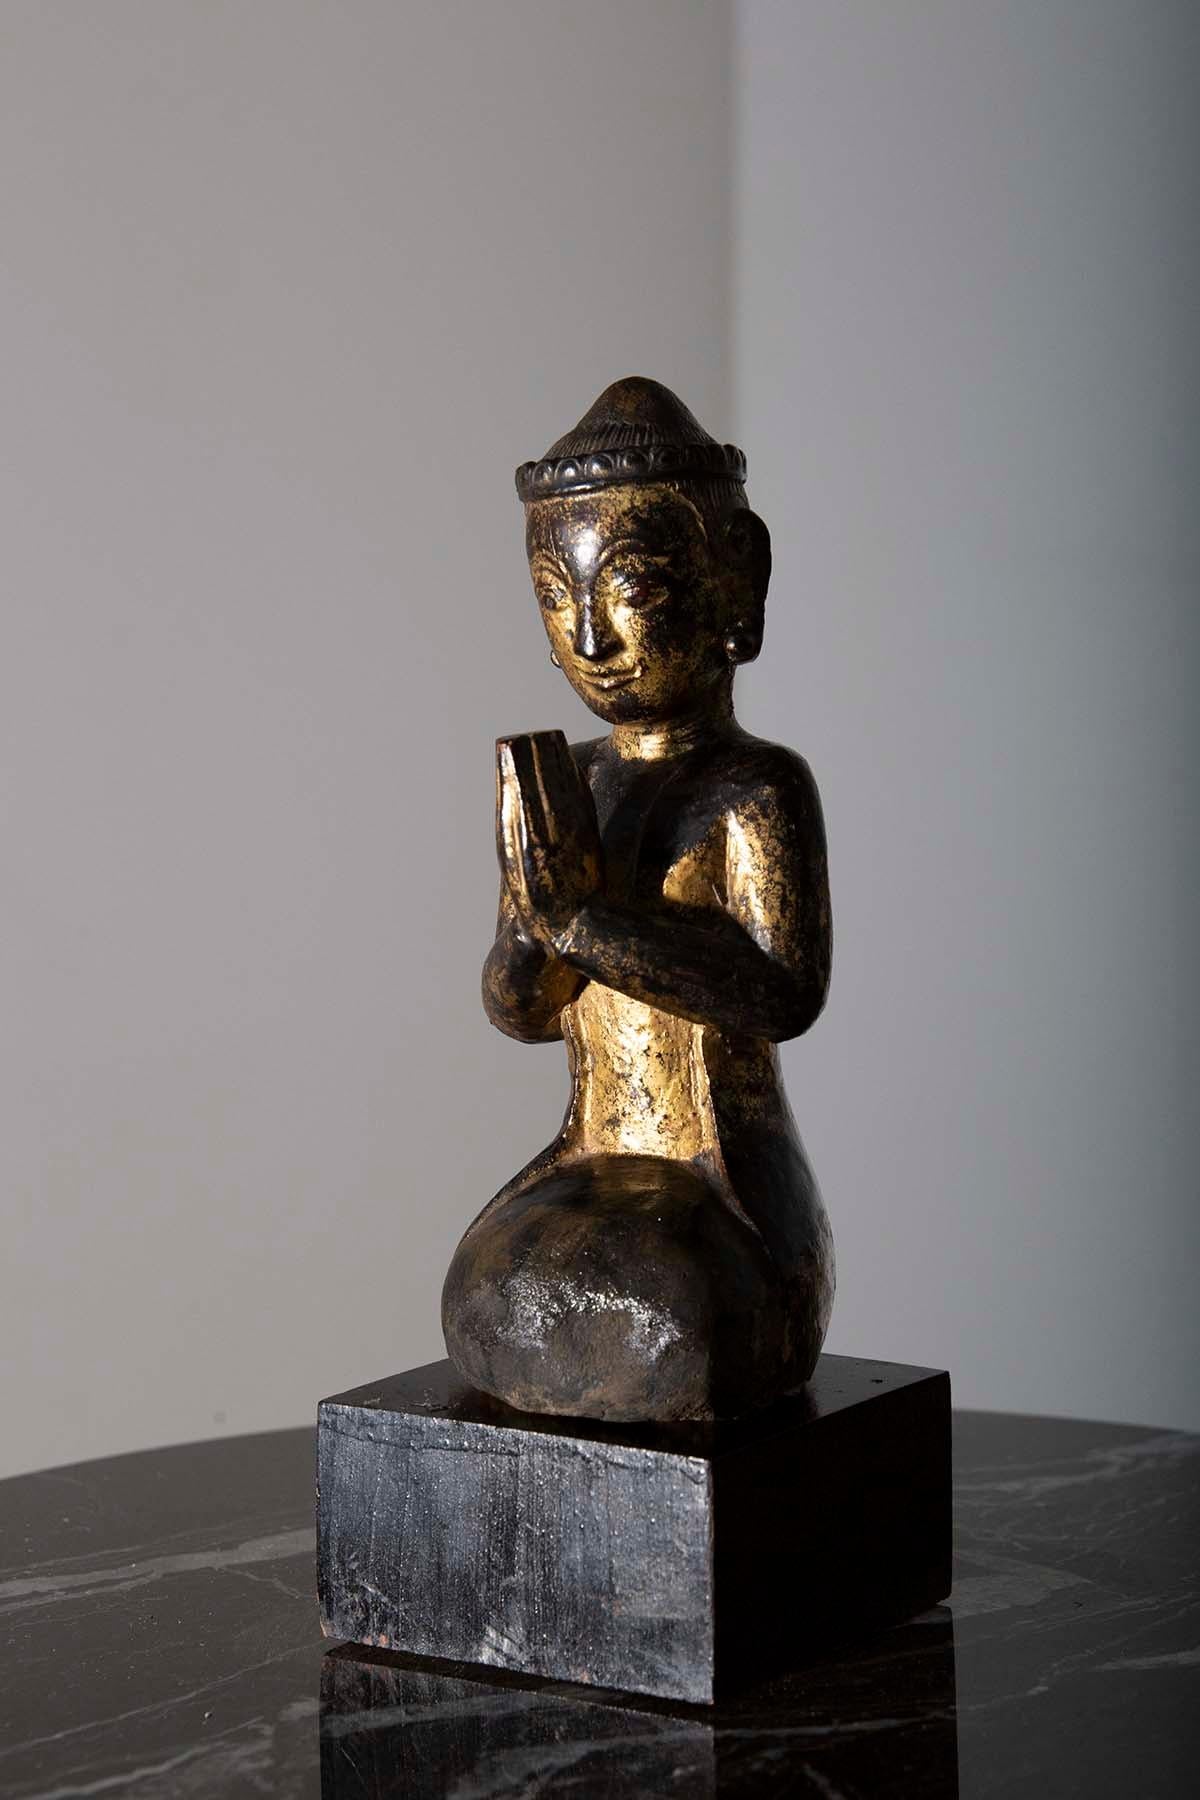 In the early 19th century, in the heart of Burma, a small but profoundly meaningful masterpiece emerged—a lacquered wooden sculpture that captures the essence of devotion and prayer. This exquisite creation, depicting a praying monk or orant, is a